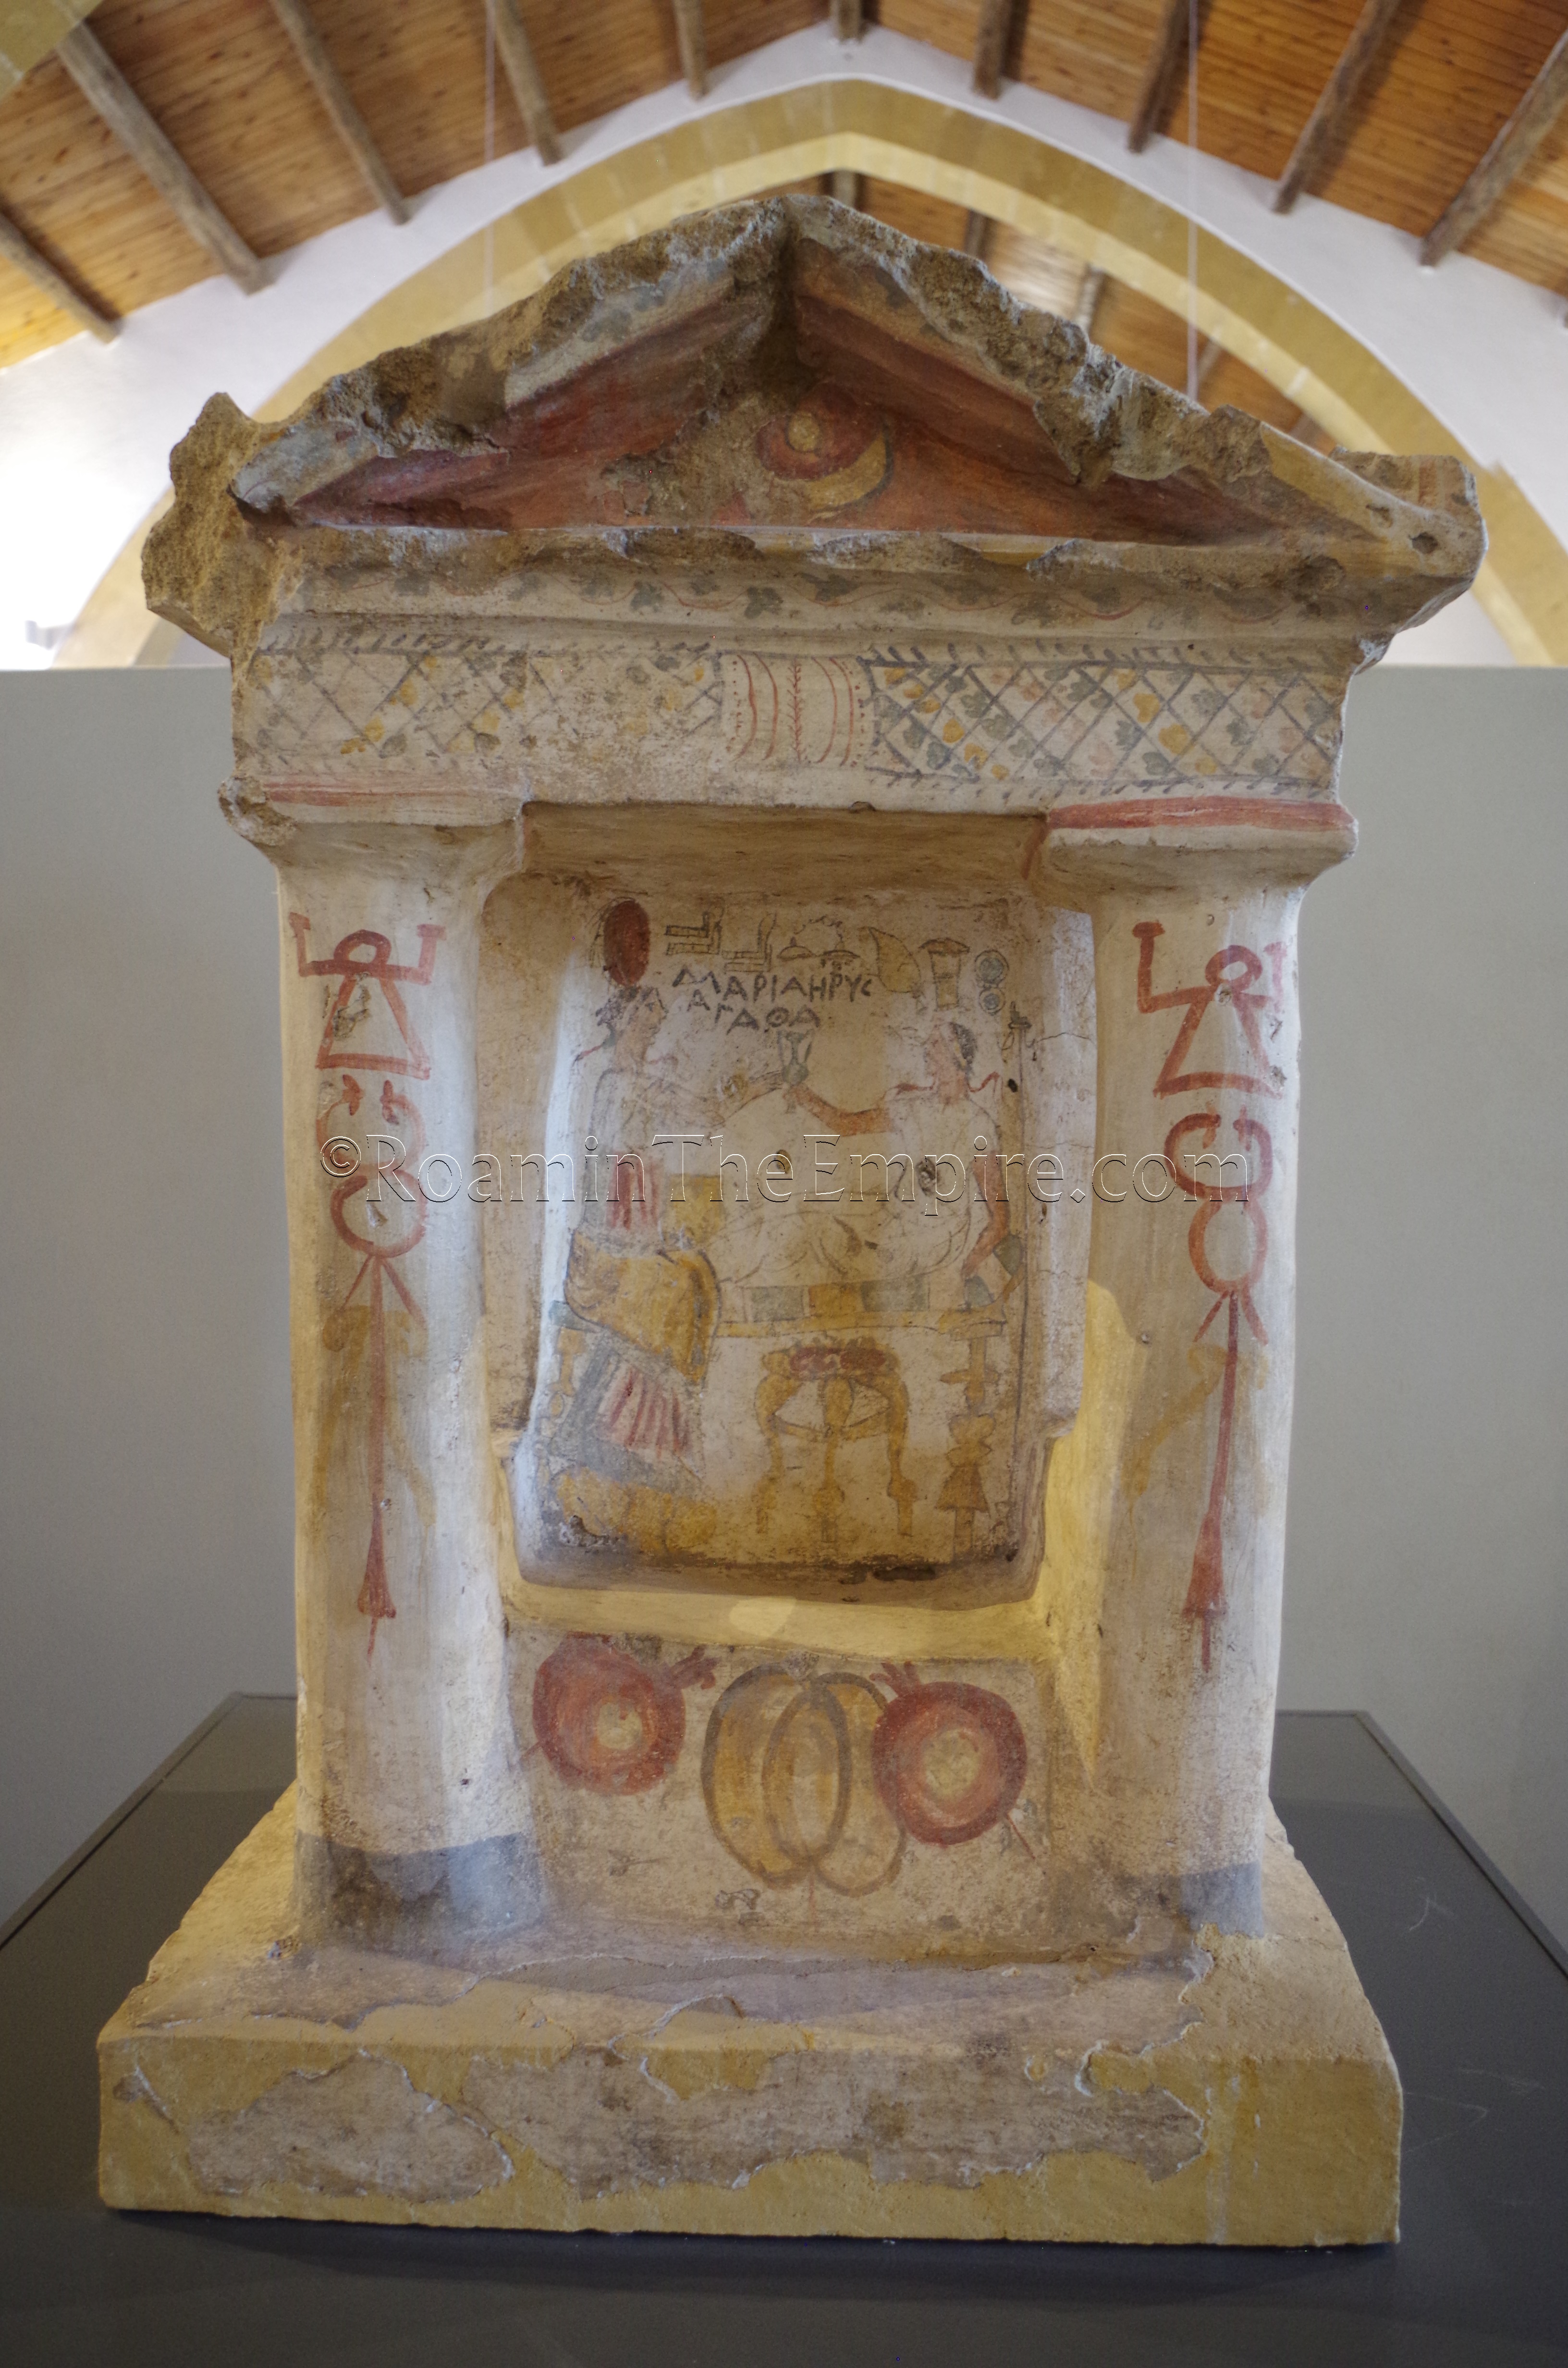 Painted funerary aedicula from the 2nd century BCE with Greek funerary banquet motiff and Punic symbols such as the Tanit sign and Caduceus on the columns.